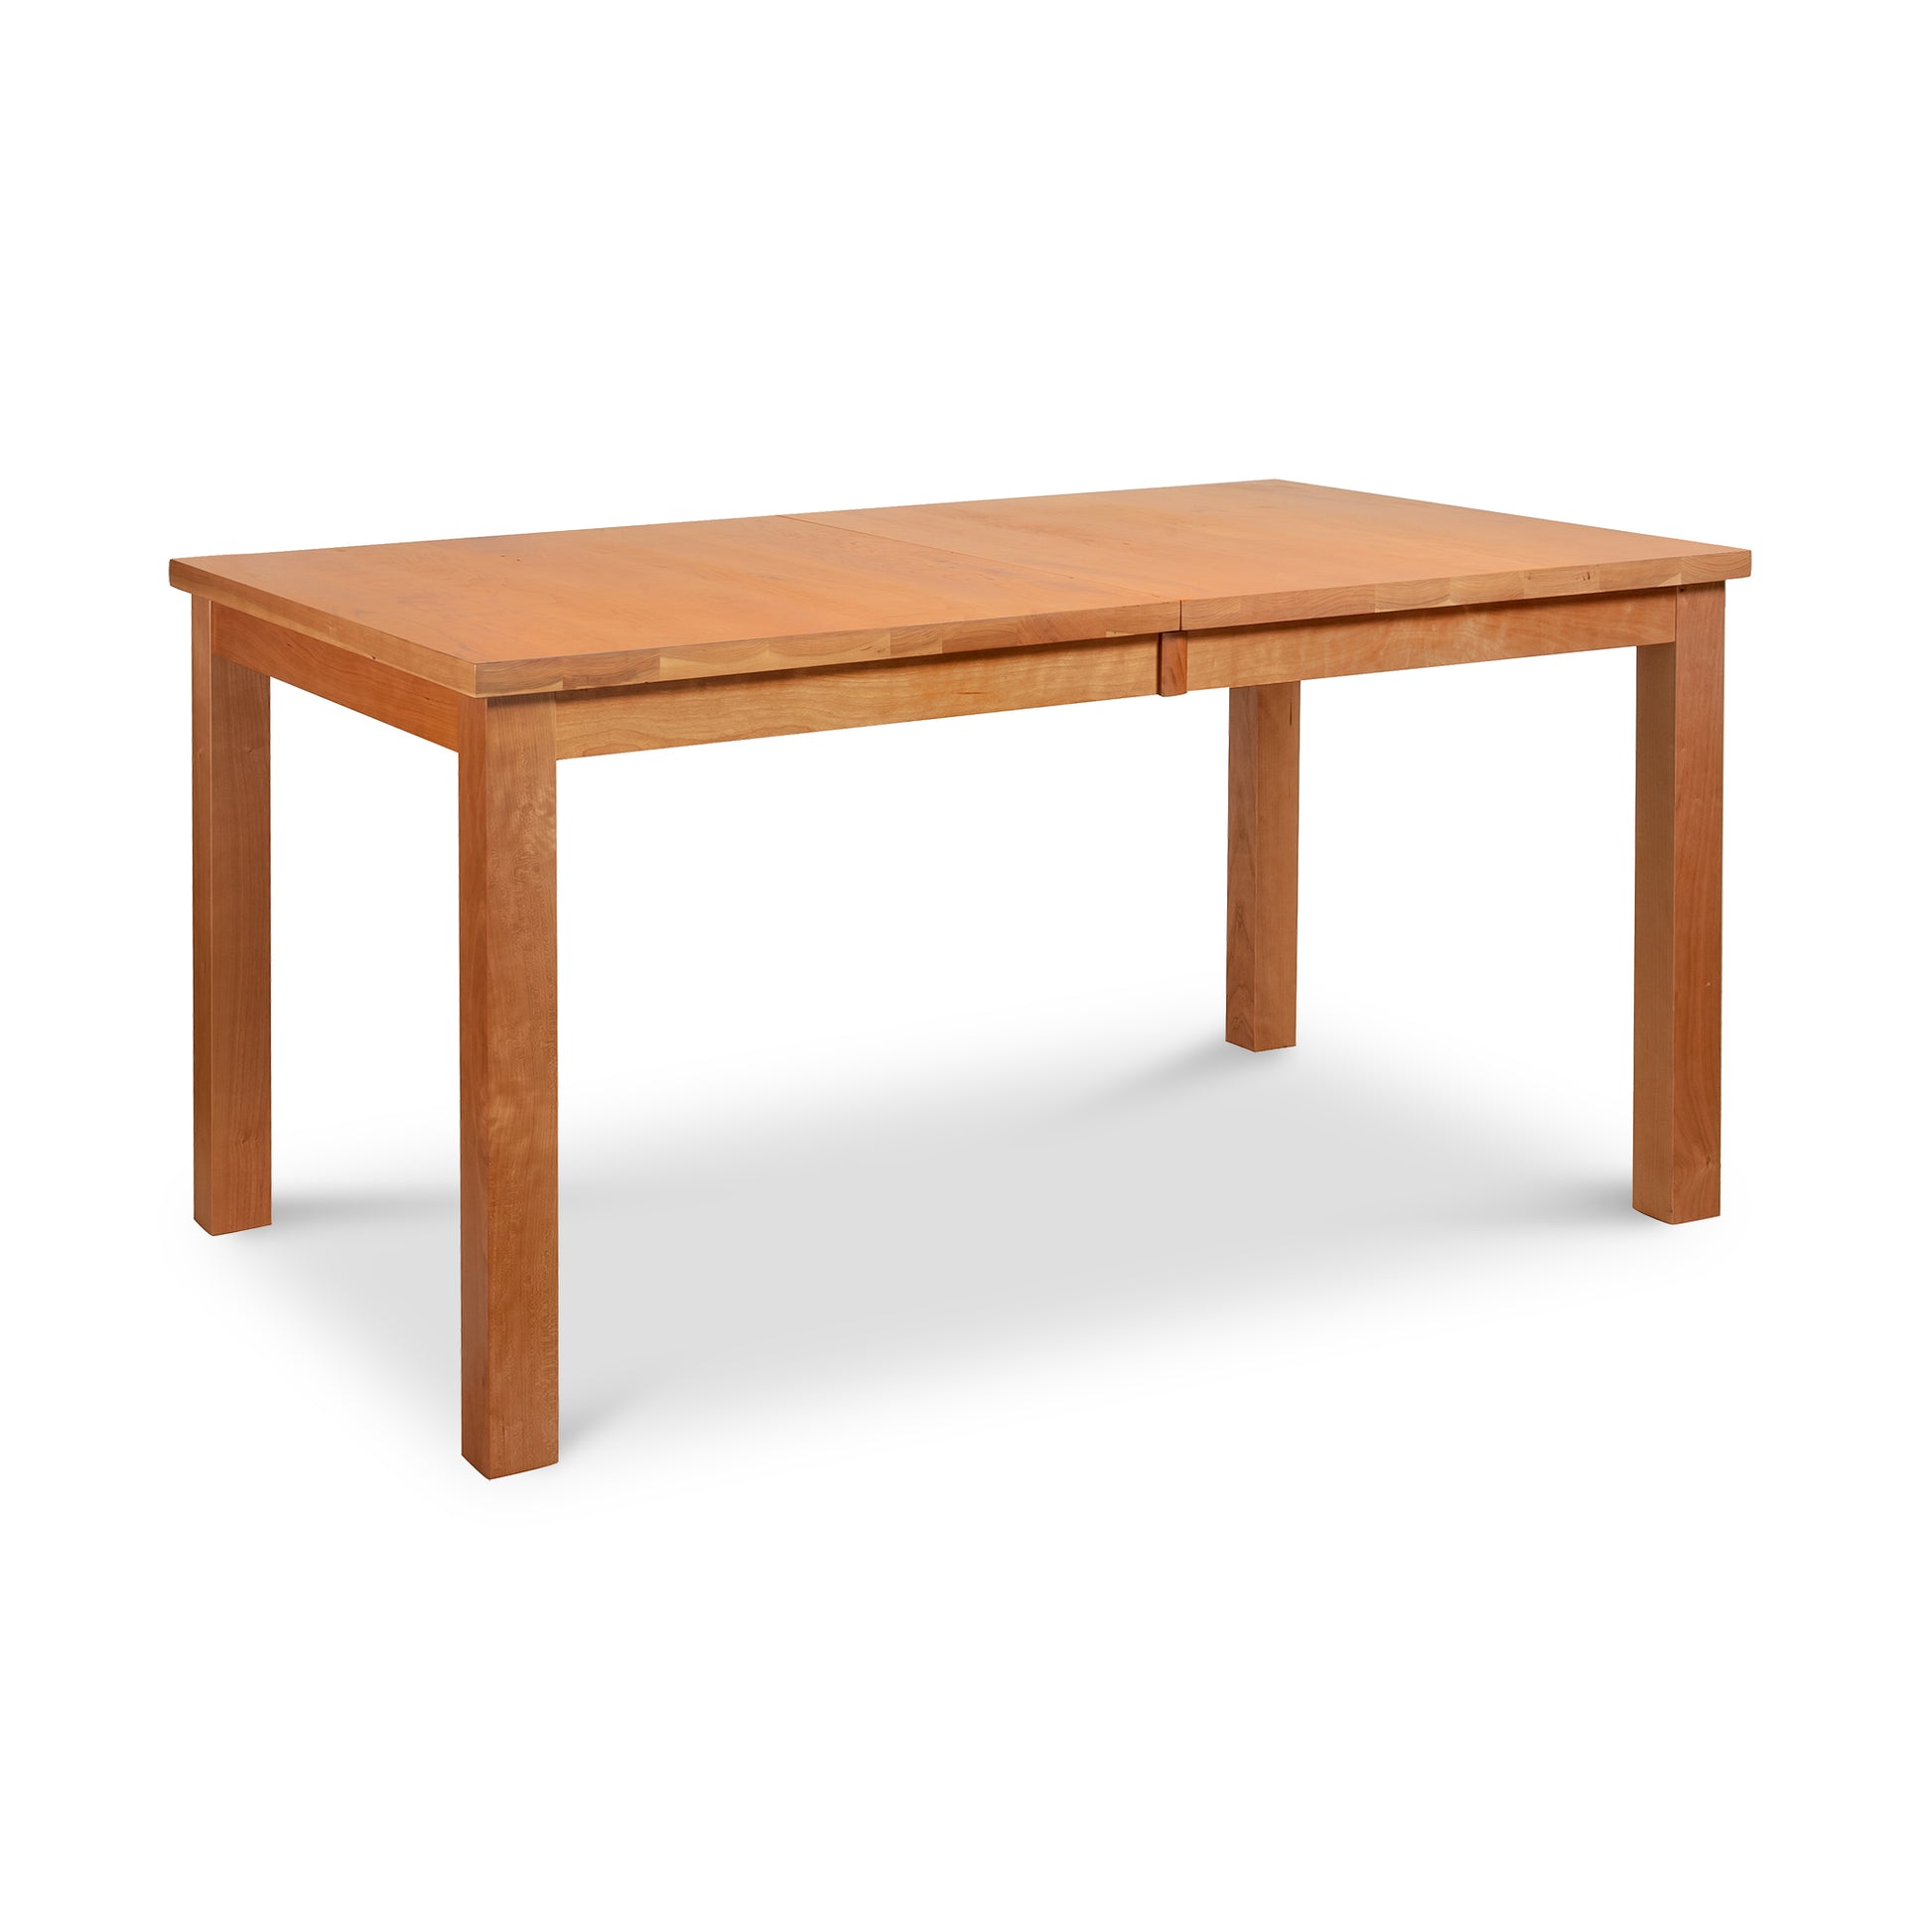 An eco-friendly Lyndon Furniture Modern Mission Parsons Extension Table made from sustainably harvested woods, set against a white background.